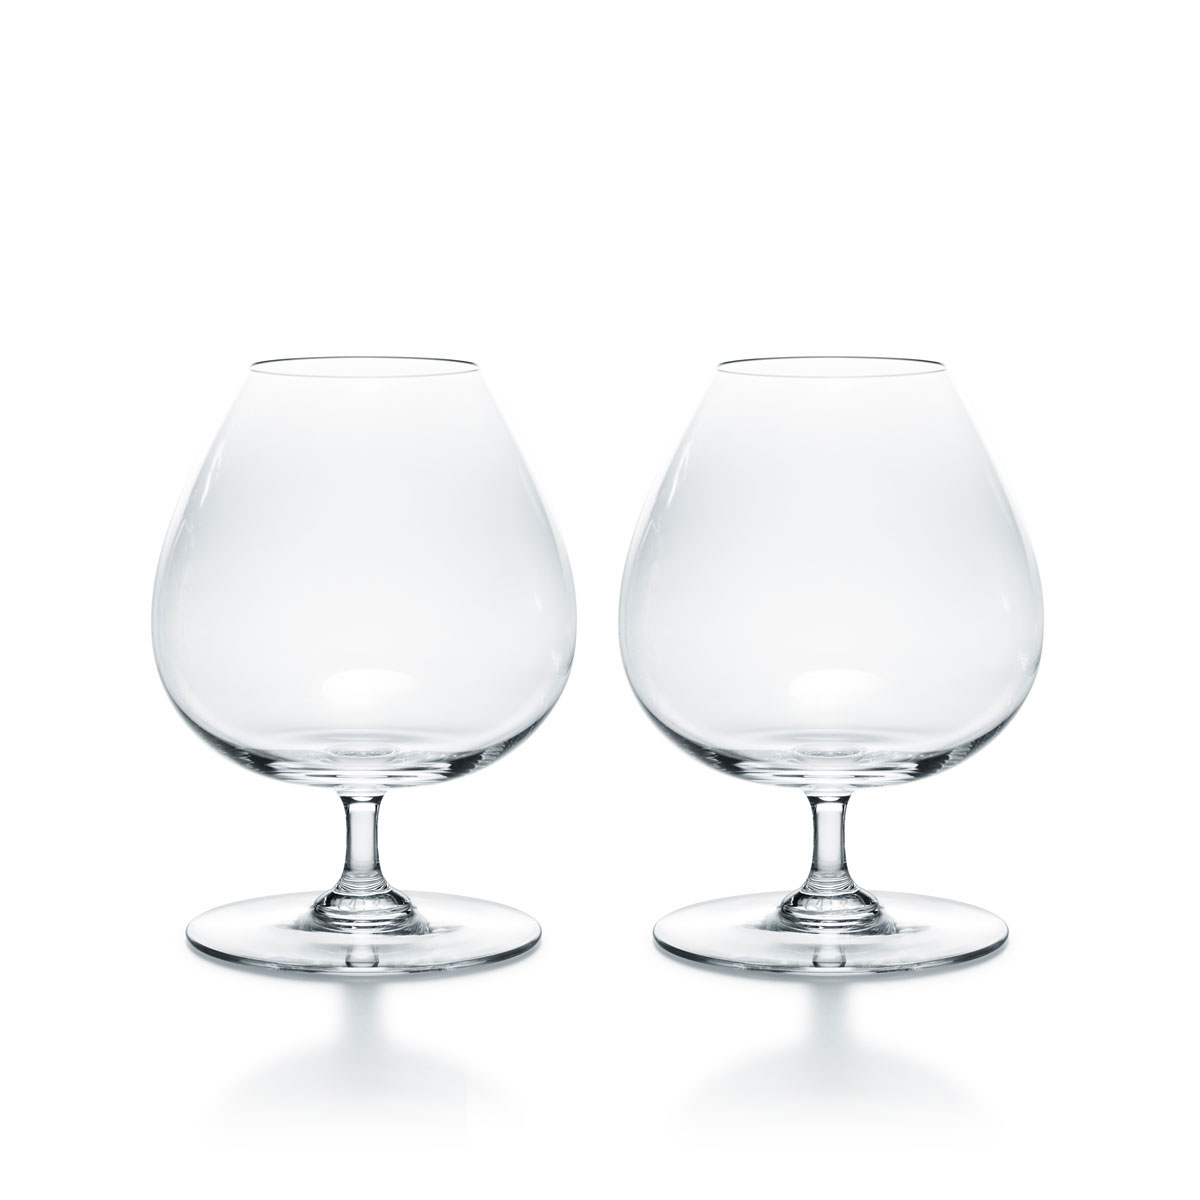 Baccarat Crystal, Degustation Perfection Large Brandy Glasses, Pair